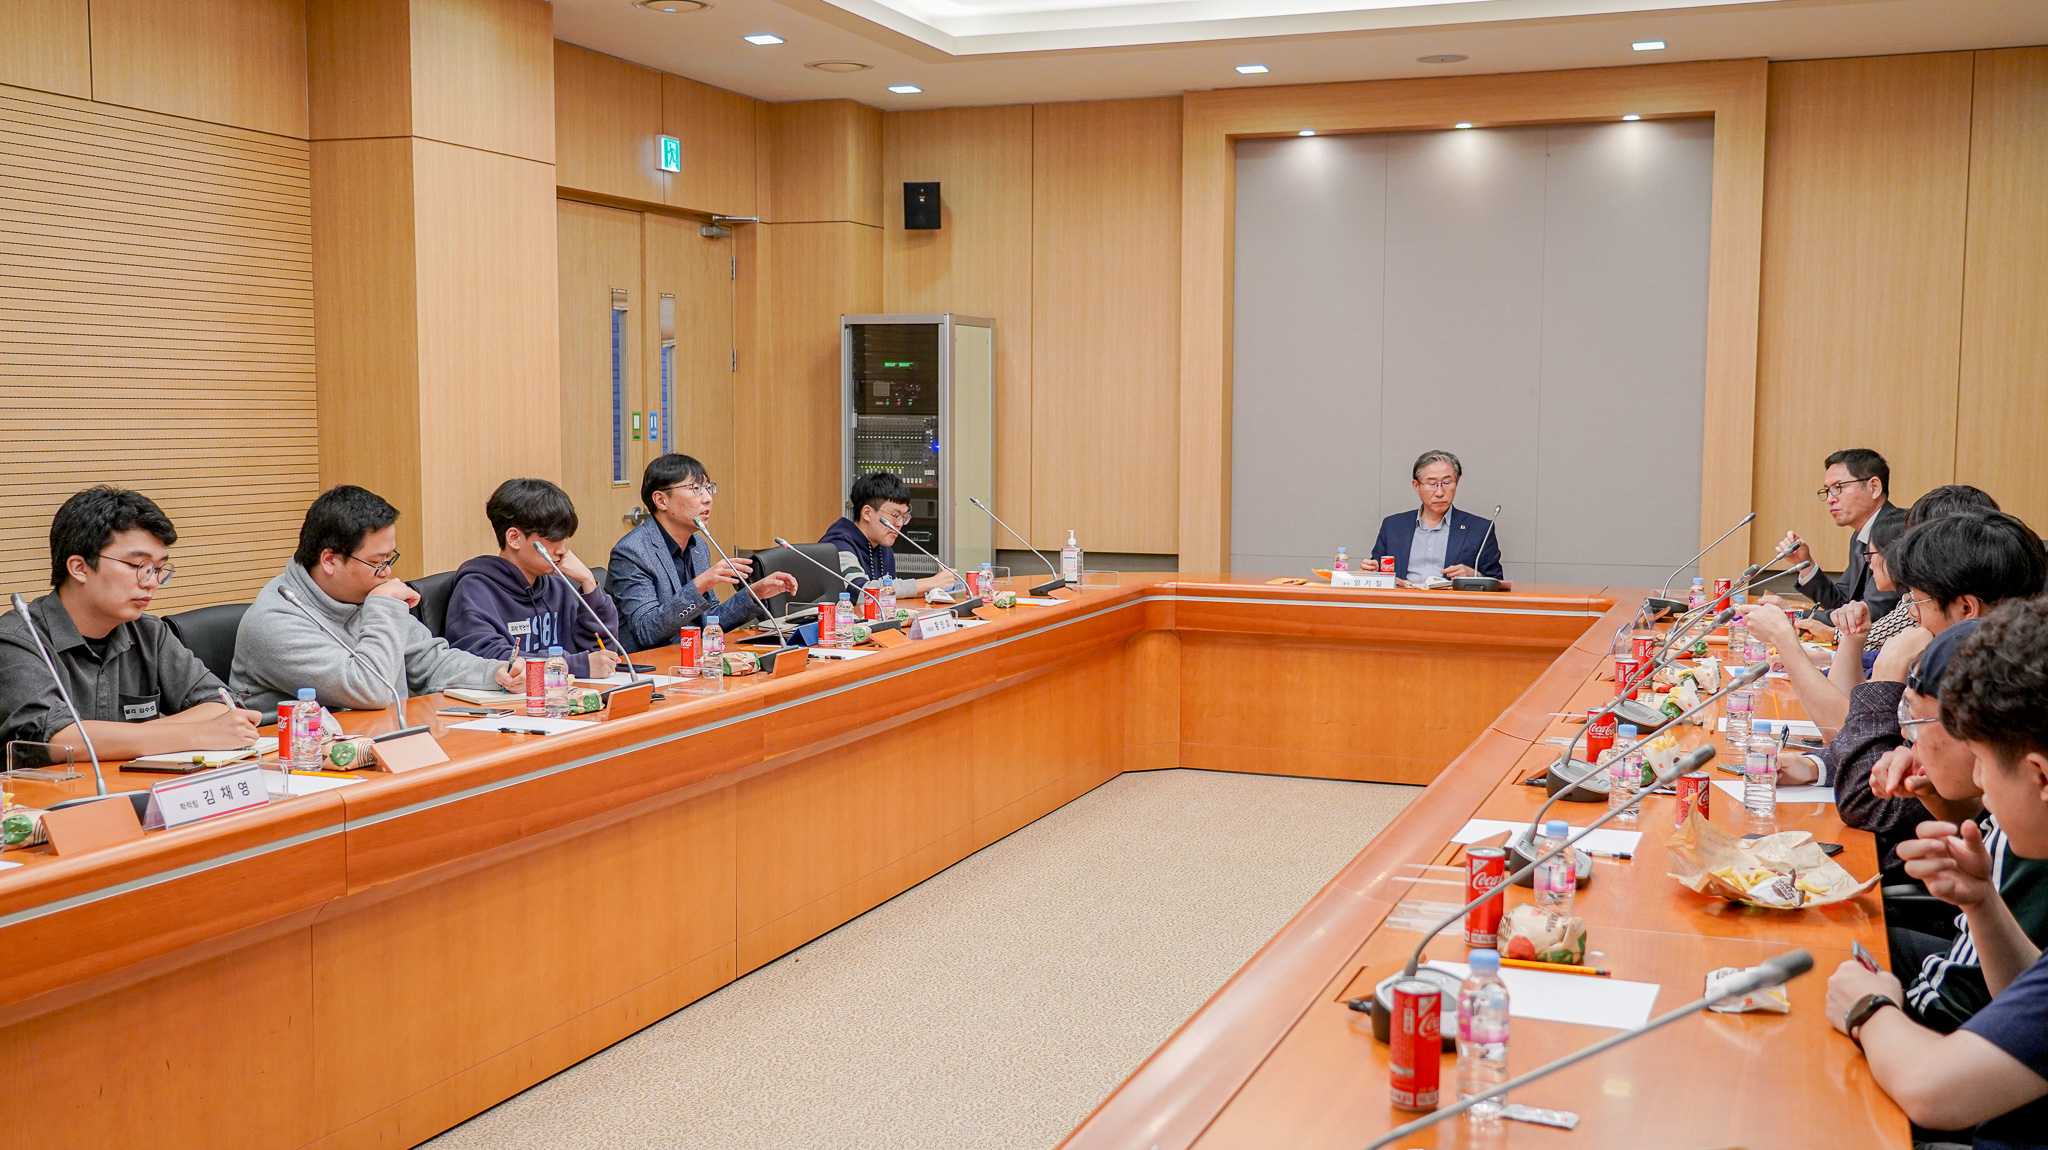 GIST President Kichul Lim holds a hamburger meeting with a delegation of student researchers... Utilizing the integrated management system, promising stable payment of student labor costs next year 이미지